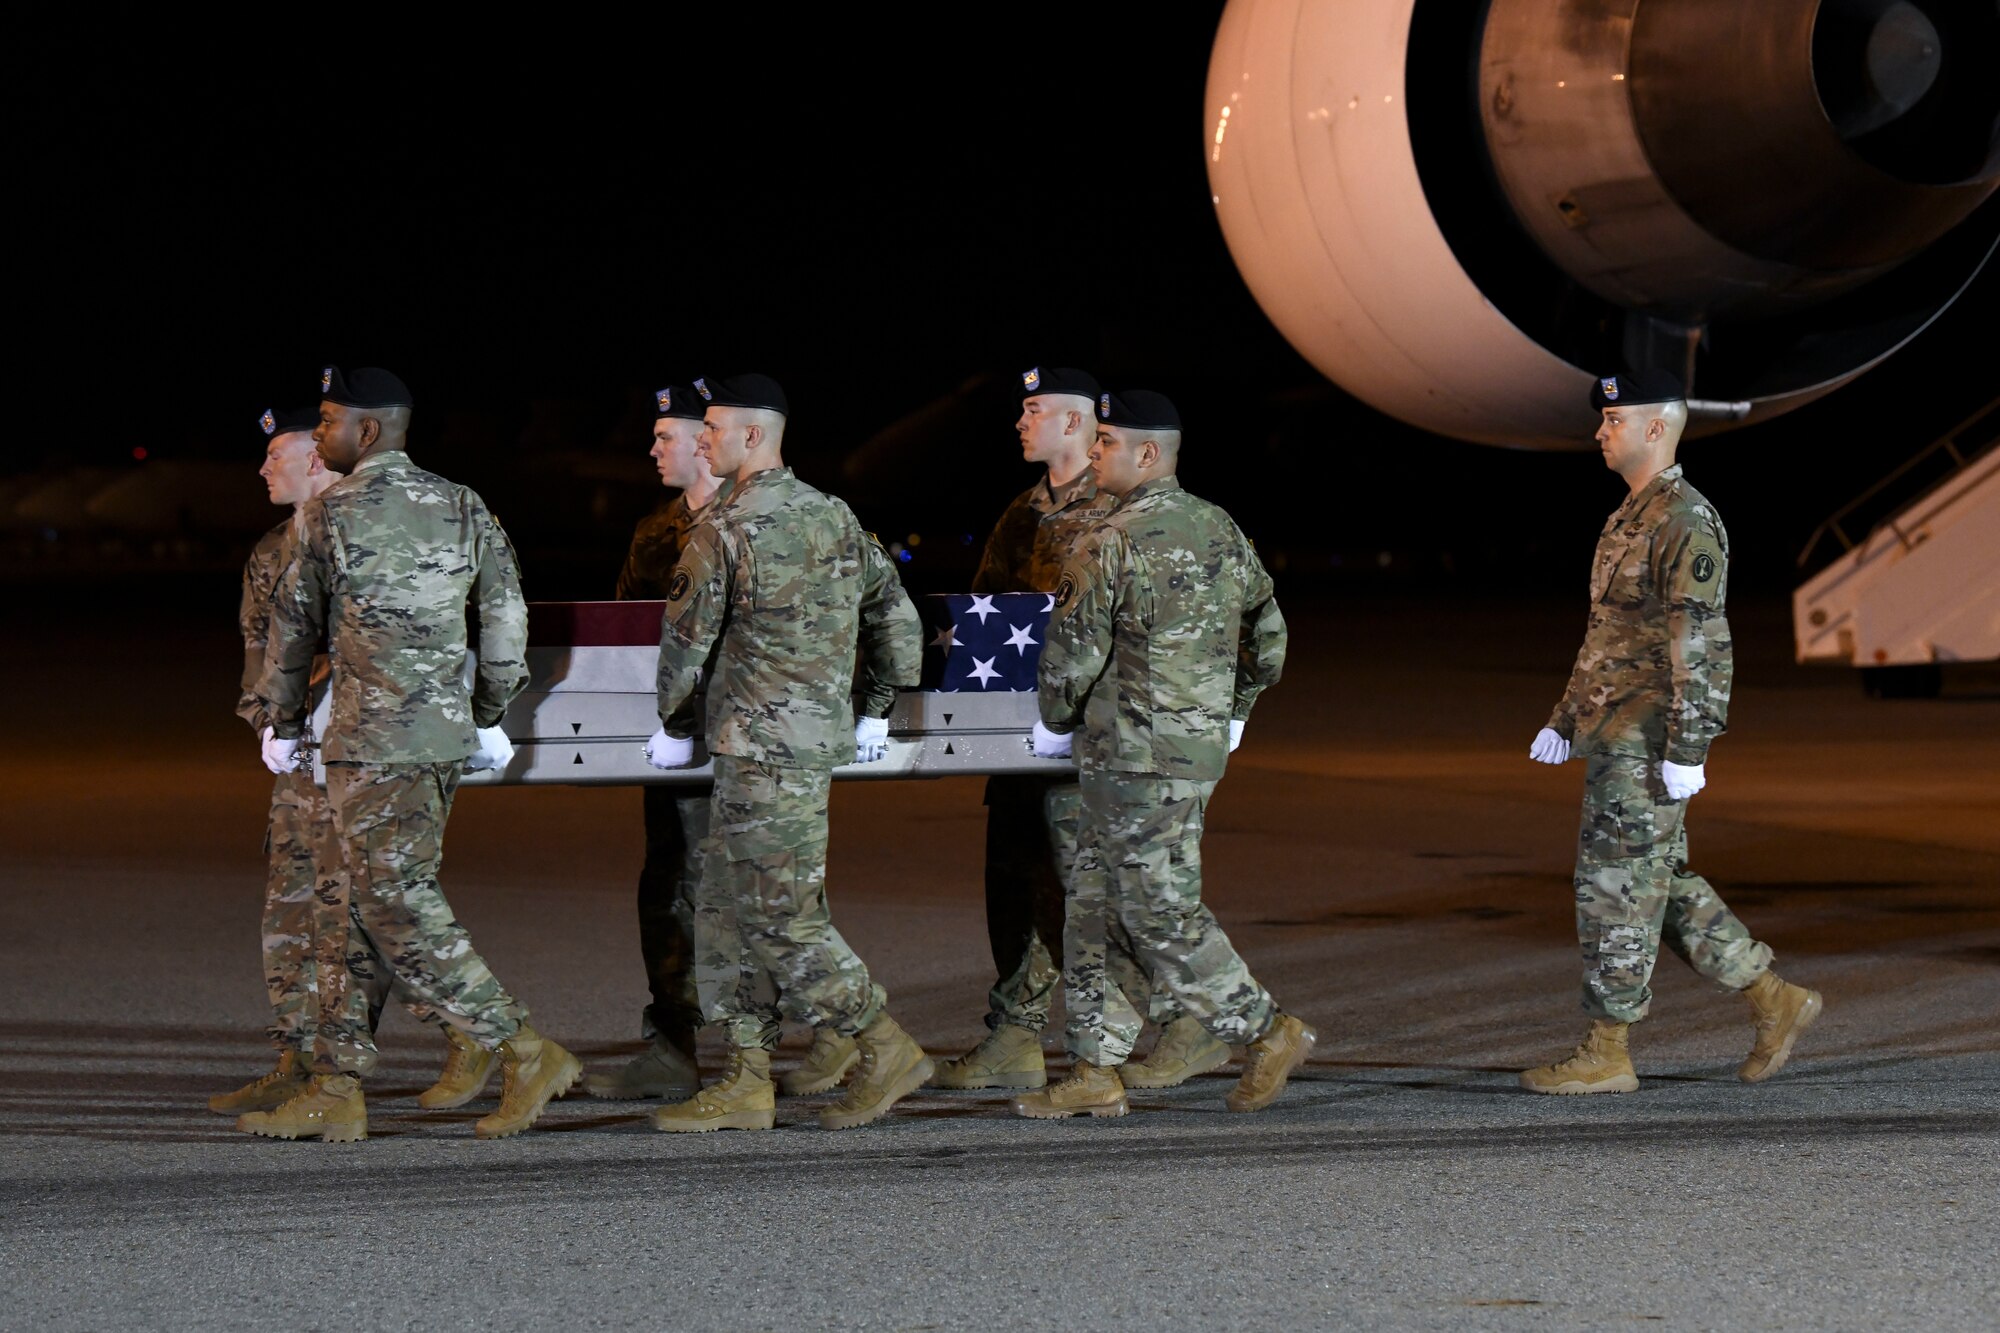 A U.S. Army carry team transfers the remains of Spc. Michael I. Nance, of Chicago, Ill., July 31, 2019 at Dover Air Force Base, Del. Nance was assigned to the 1st Battalion, 505th Parachute Infantry Regiment, 3rd Brigade Combat Team, 82nd Airborne Division, Fort Bragg, N.C. (U.S. Air Force Photo by Senior Airman Christopher Quail)